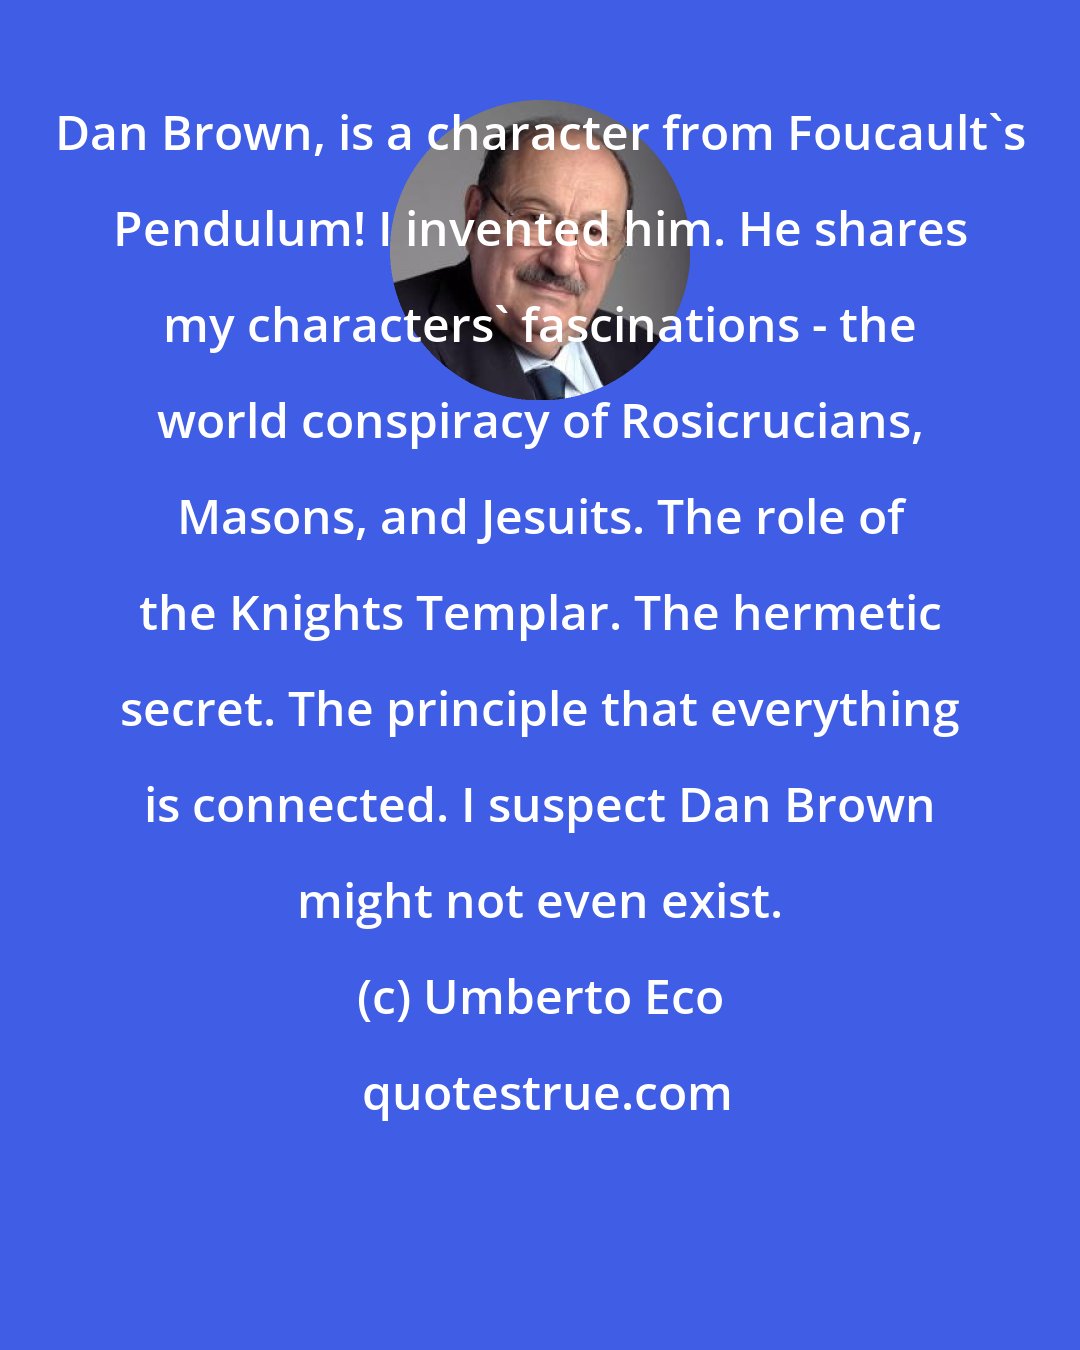 Umberto Eco: Dan Brown, is a character from Foucault's Pendulum! I invented him. He shares my characters' fascinations - the world conspiracy of Rosicrucians, Masons, and Jesuits. The role of the Knights Templar. The hermetic secret. The principle that everything is connected. I suspect Dan Brown might not even exist.